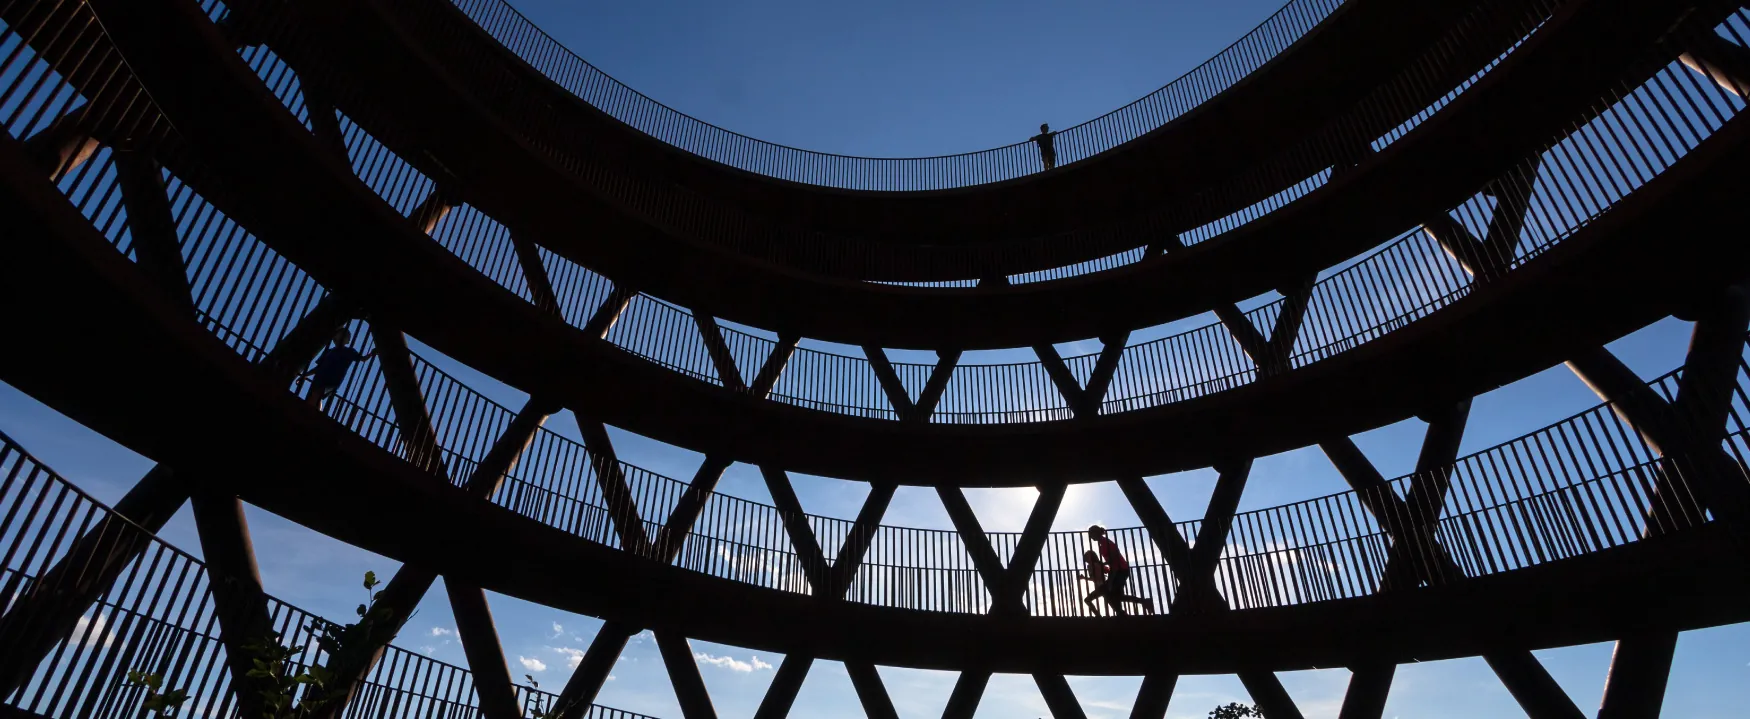 A photo shows a low-angle view of silhouettes of people walking or running in the high observation tower, Camp Adventures in Haslev on the South Island of New Zealand.